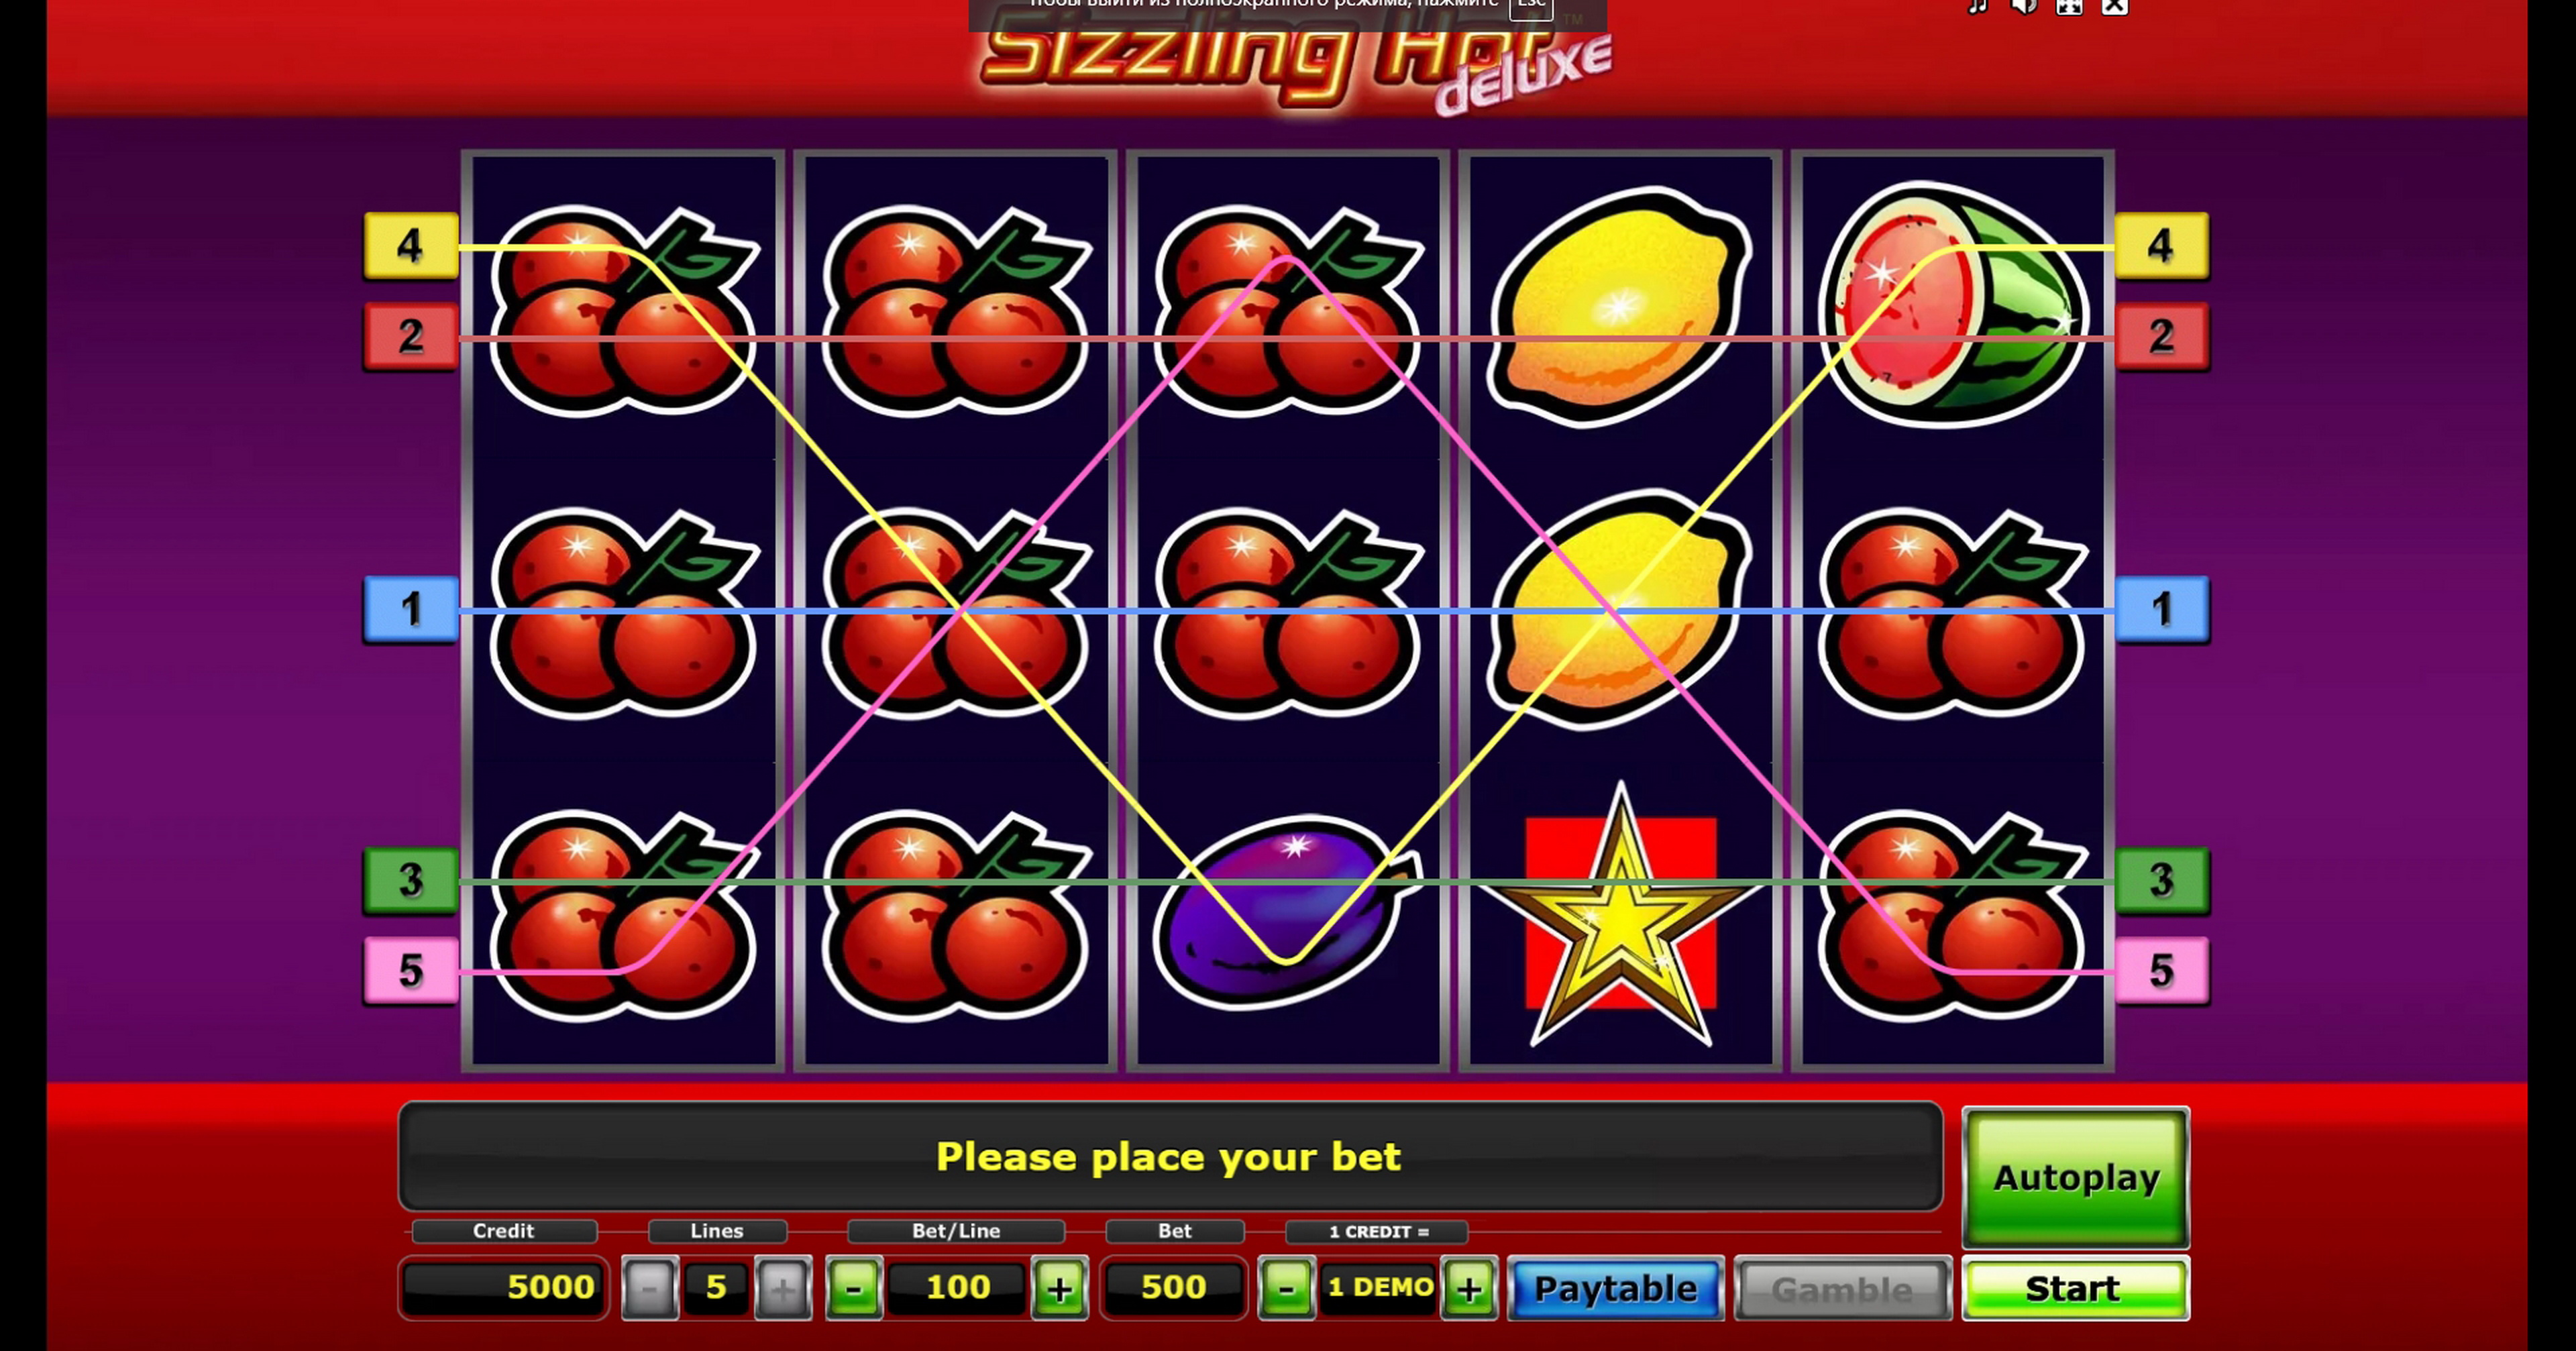  slot games win real money app Sizzling Hot Free Online Slots 